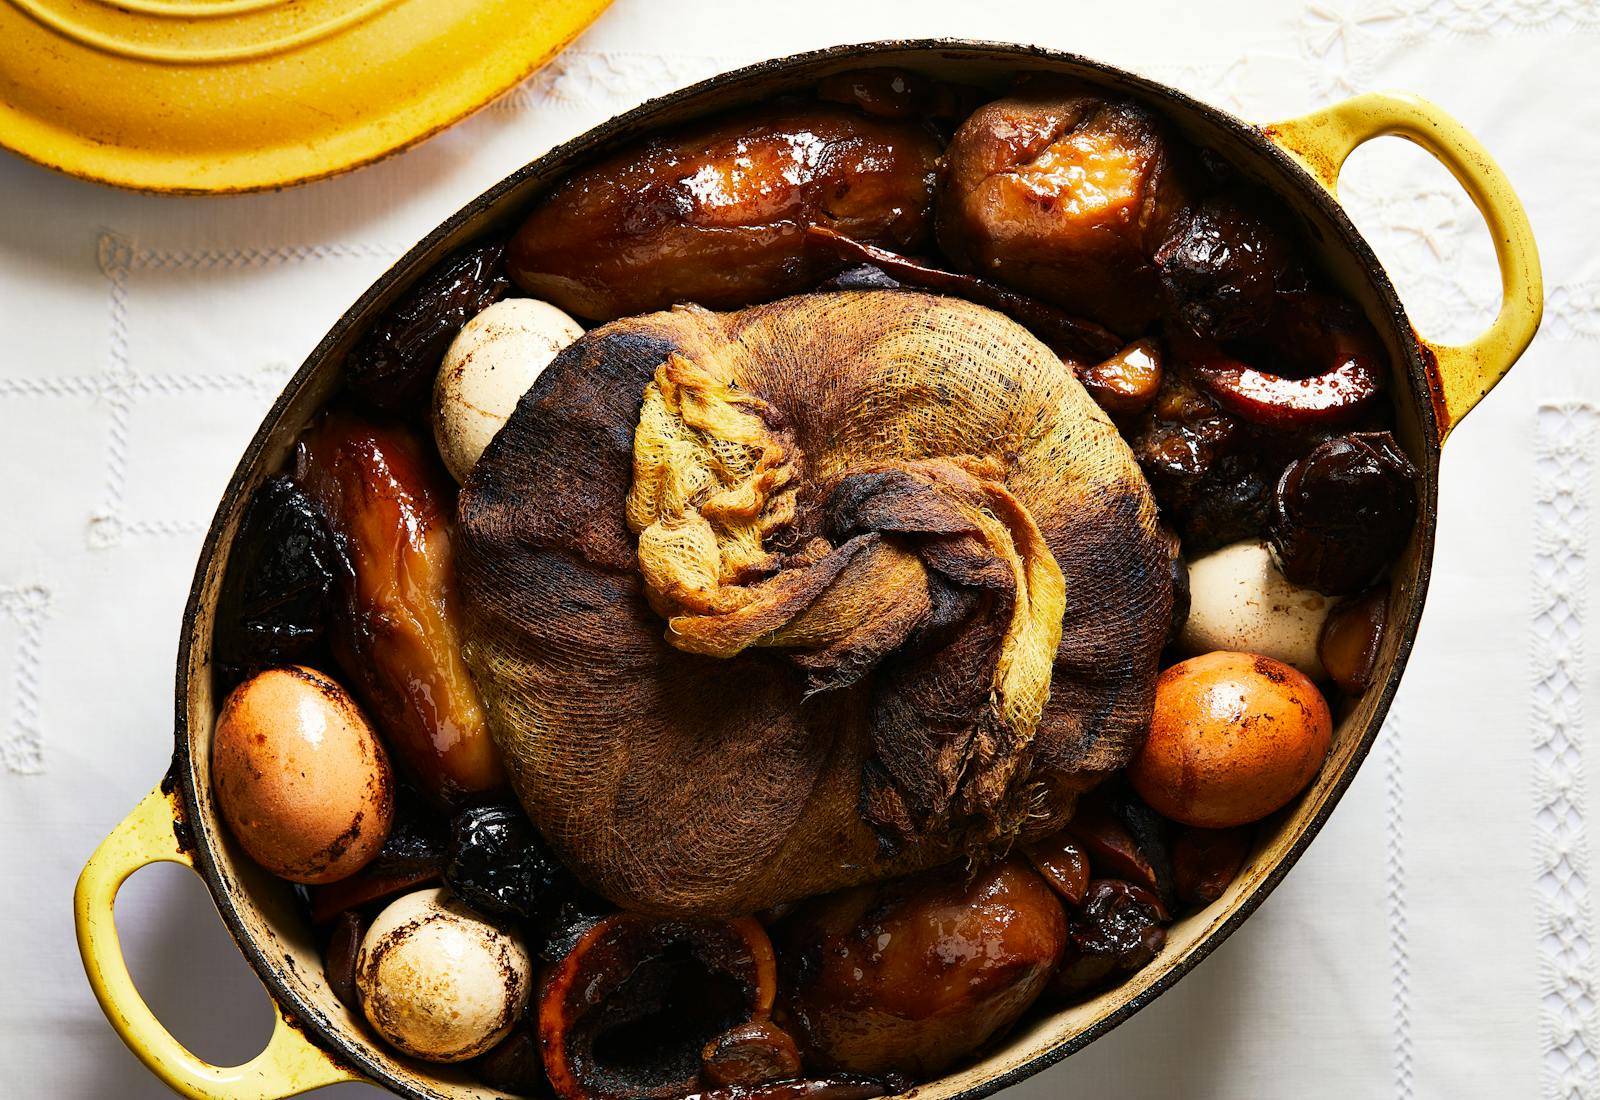 Large yellow Dutch oven filled with hamin: Russet potatoes, hard-boiled eggs, dates, beef marrow bones, wheat berries wrapped in cheesecloth and beef brisket, atop white tablecloth.